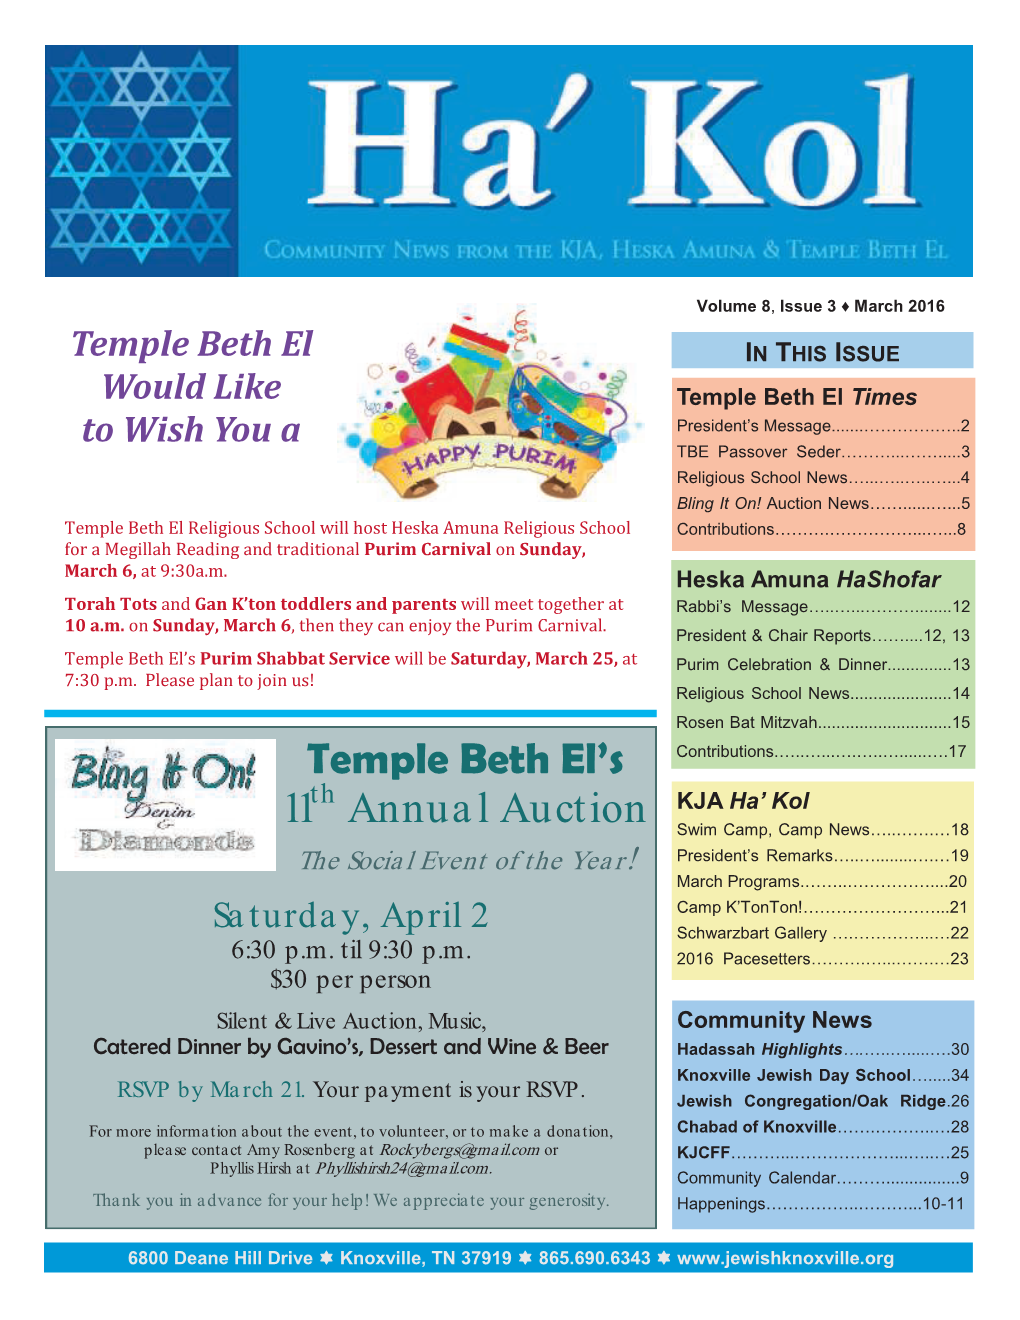 Temple Beth El Would Like to Wish You A